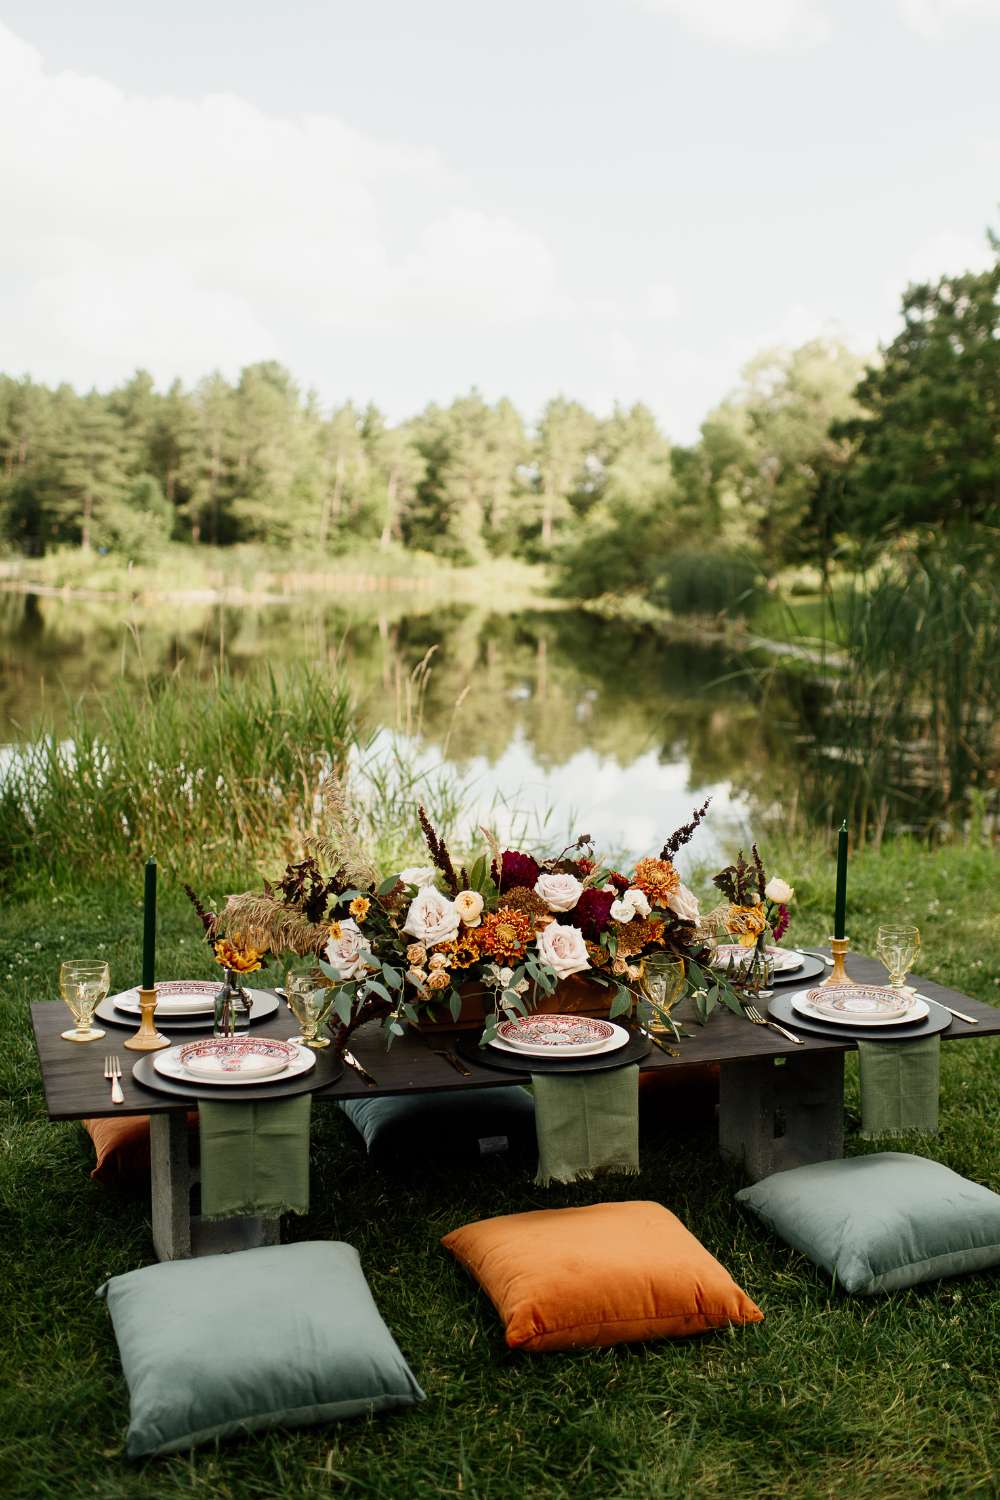 Event coordination and design, styled picnic, photoshoot